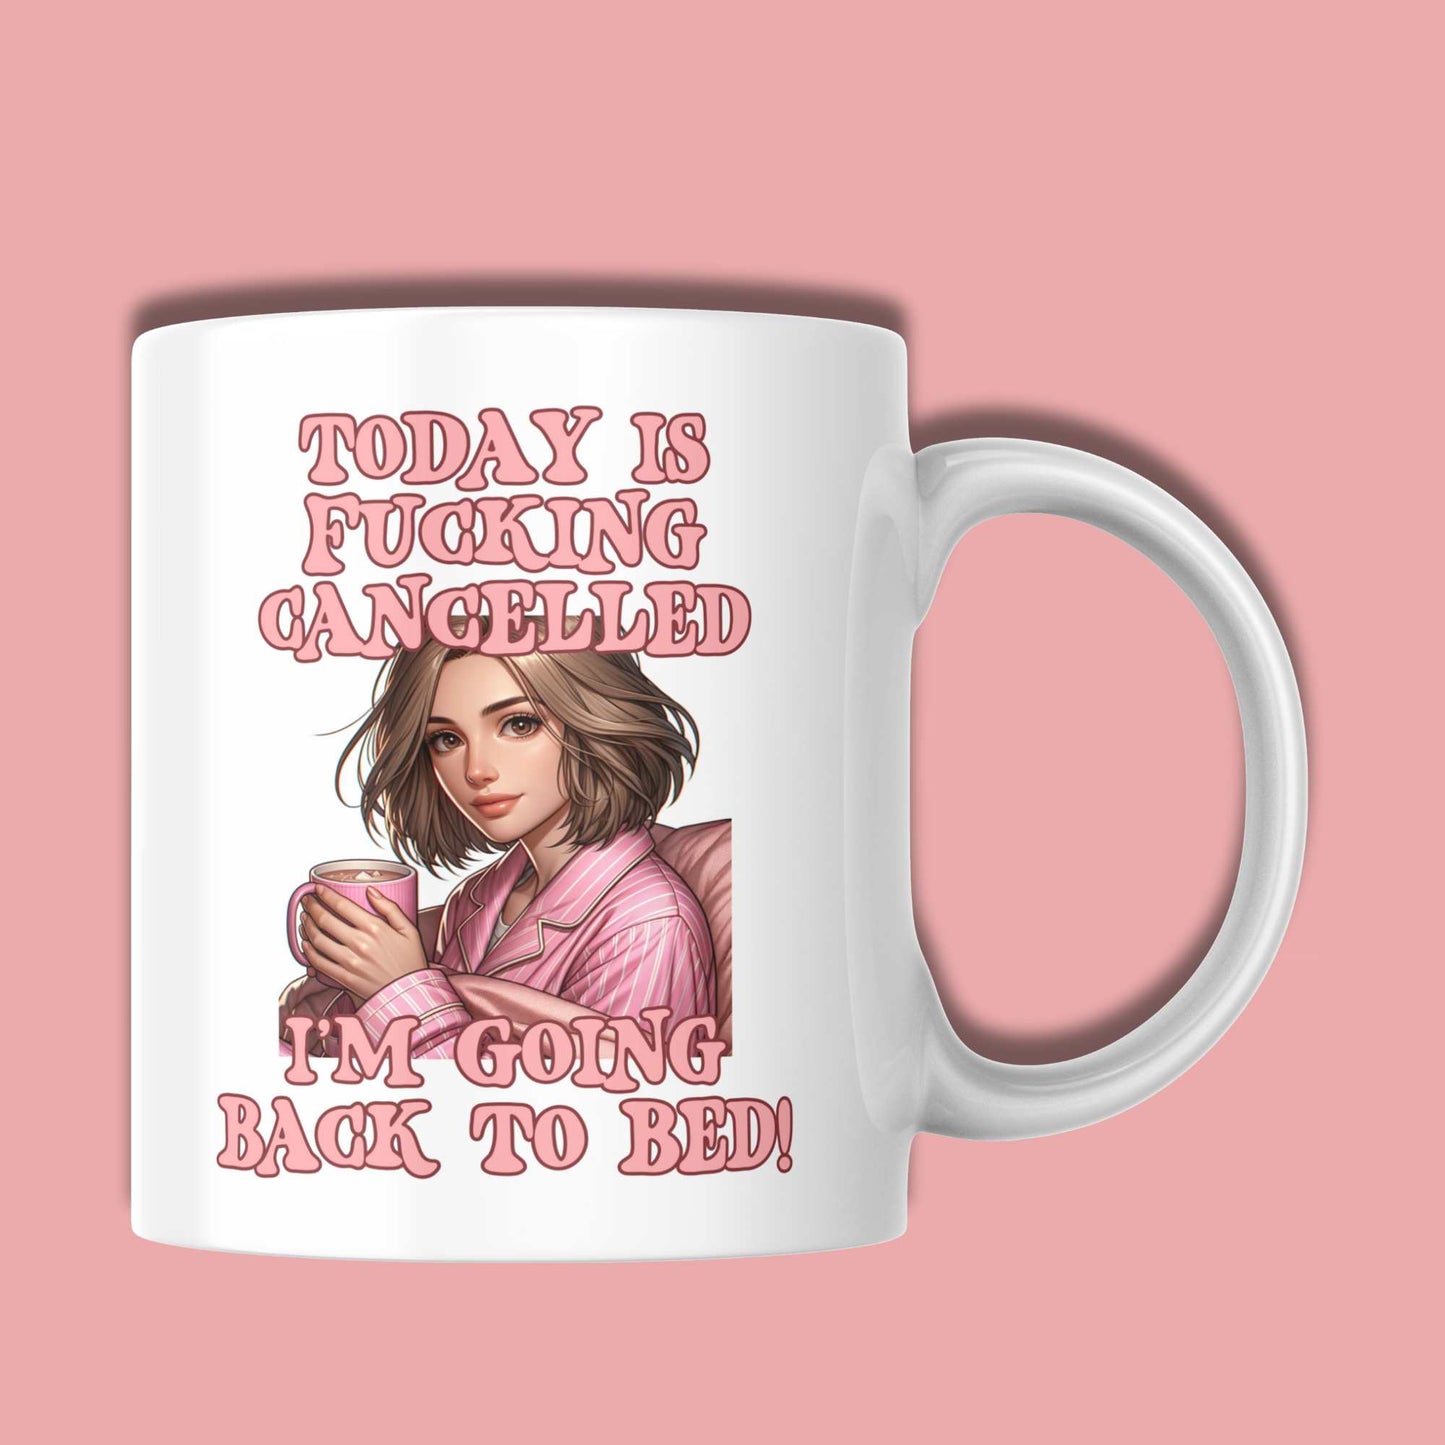 Today Is cancelled Going back to Bed Funny Mug for Her Birthday Gift for Best Friend Sister Gifts Pink Gifts for Her